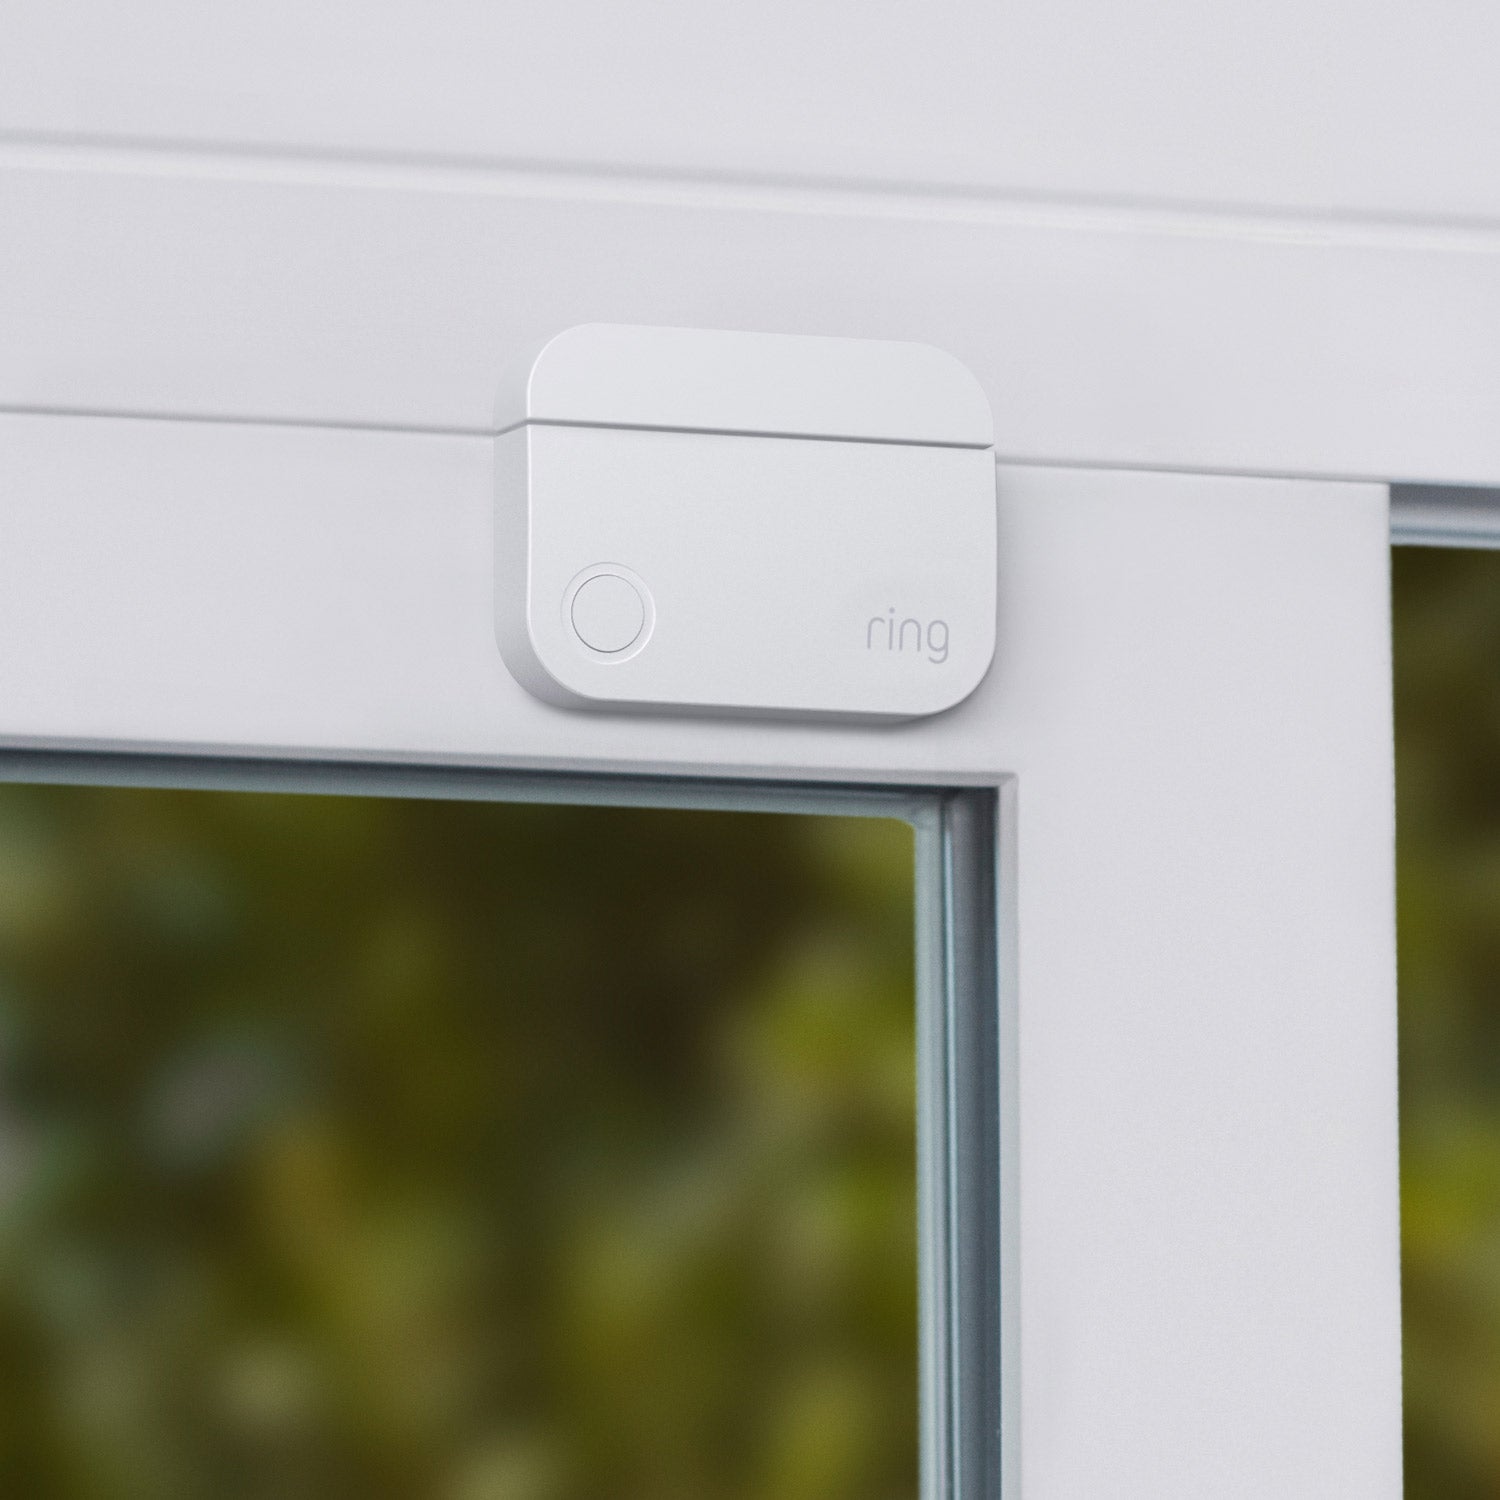 Alarm Pro Security Kit, 14-Piece (with built-in eero Wi-Fi 6 router) - Close-up of Door Contact Sensor for Alarm Pro Security Kit mounted to top frame of white door.